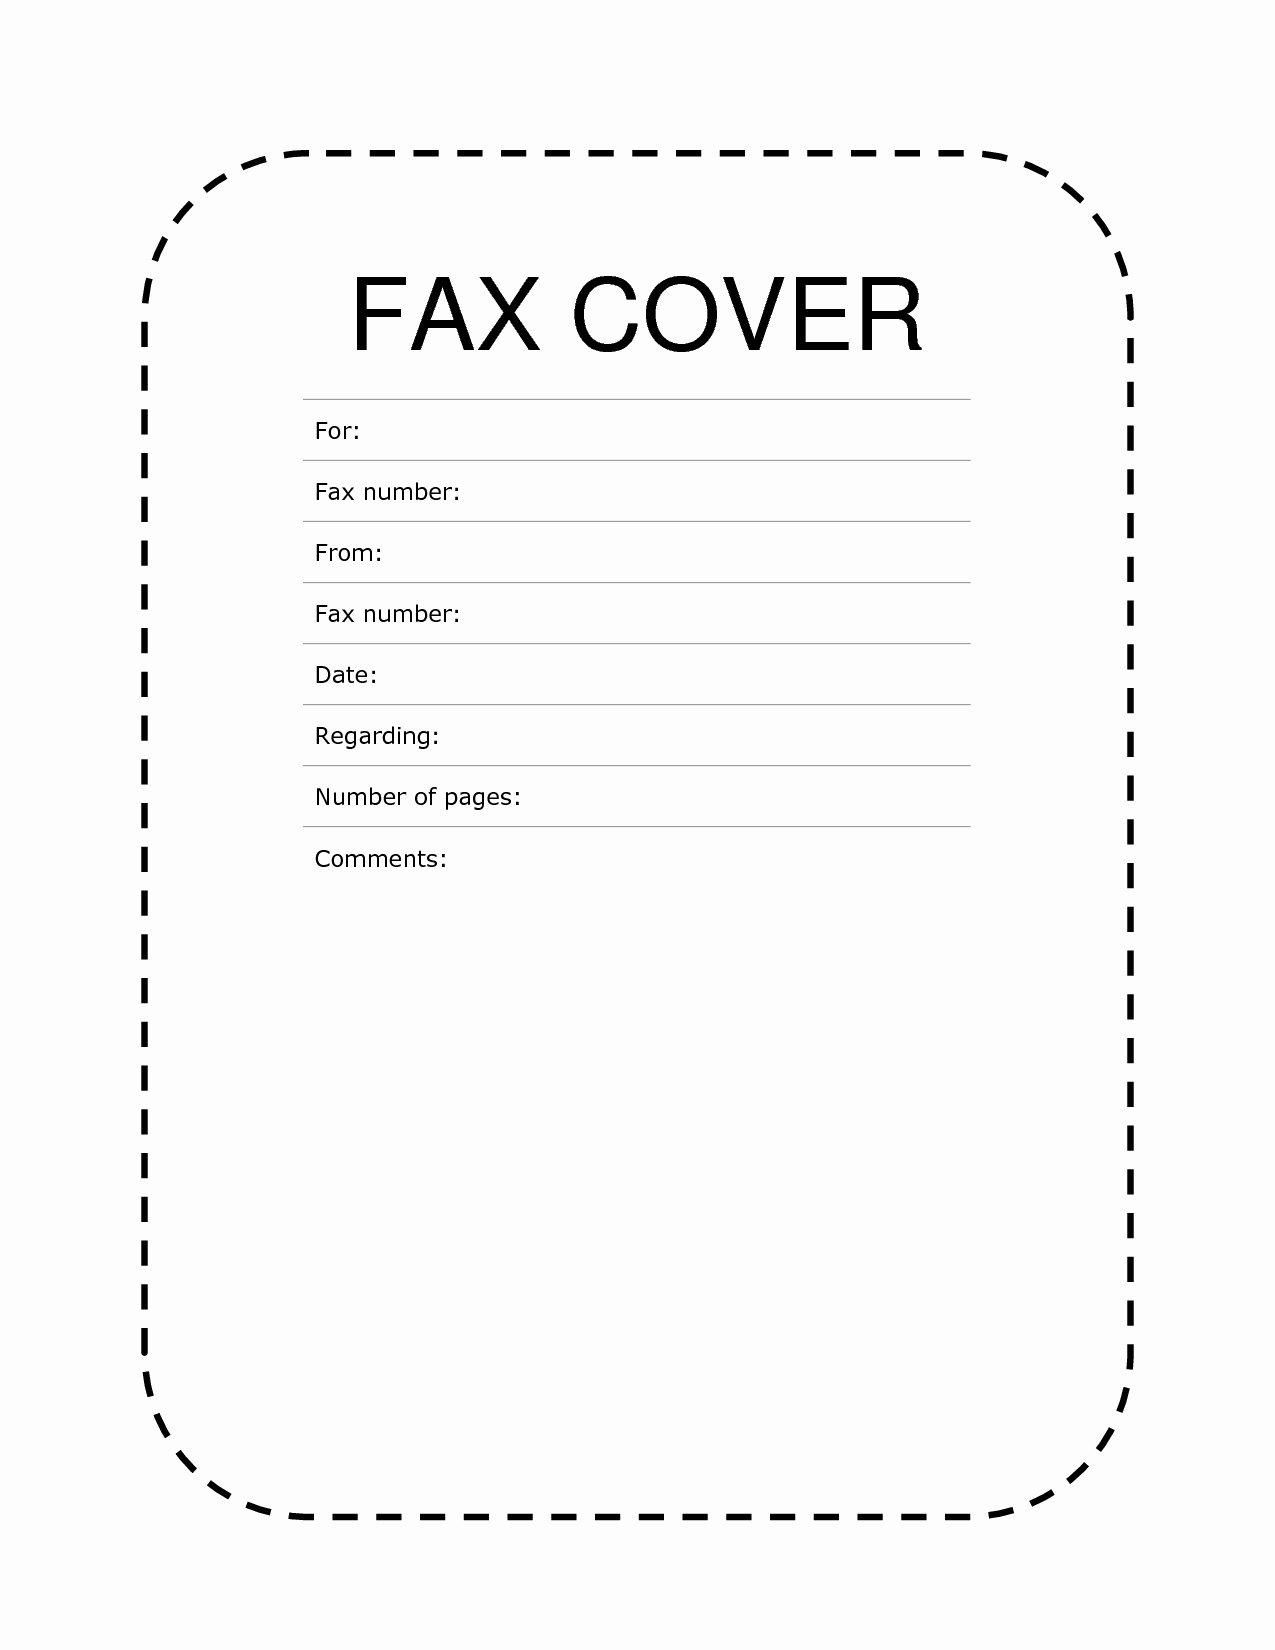 Free Fax Cover Sheets Fresh [free] Fax Cover Sheet Template